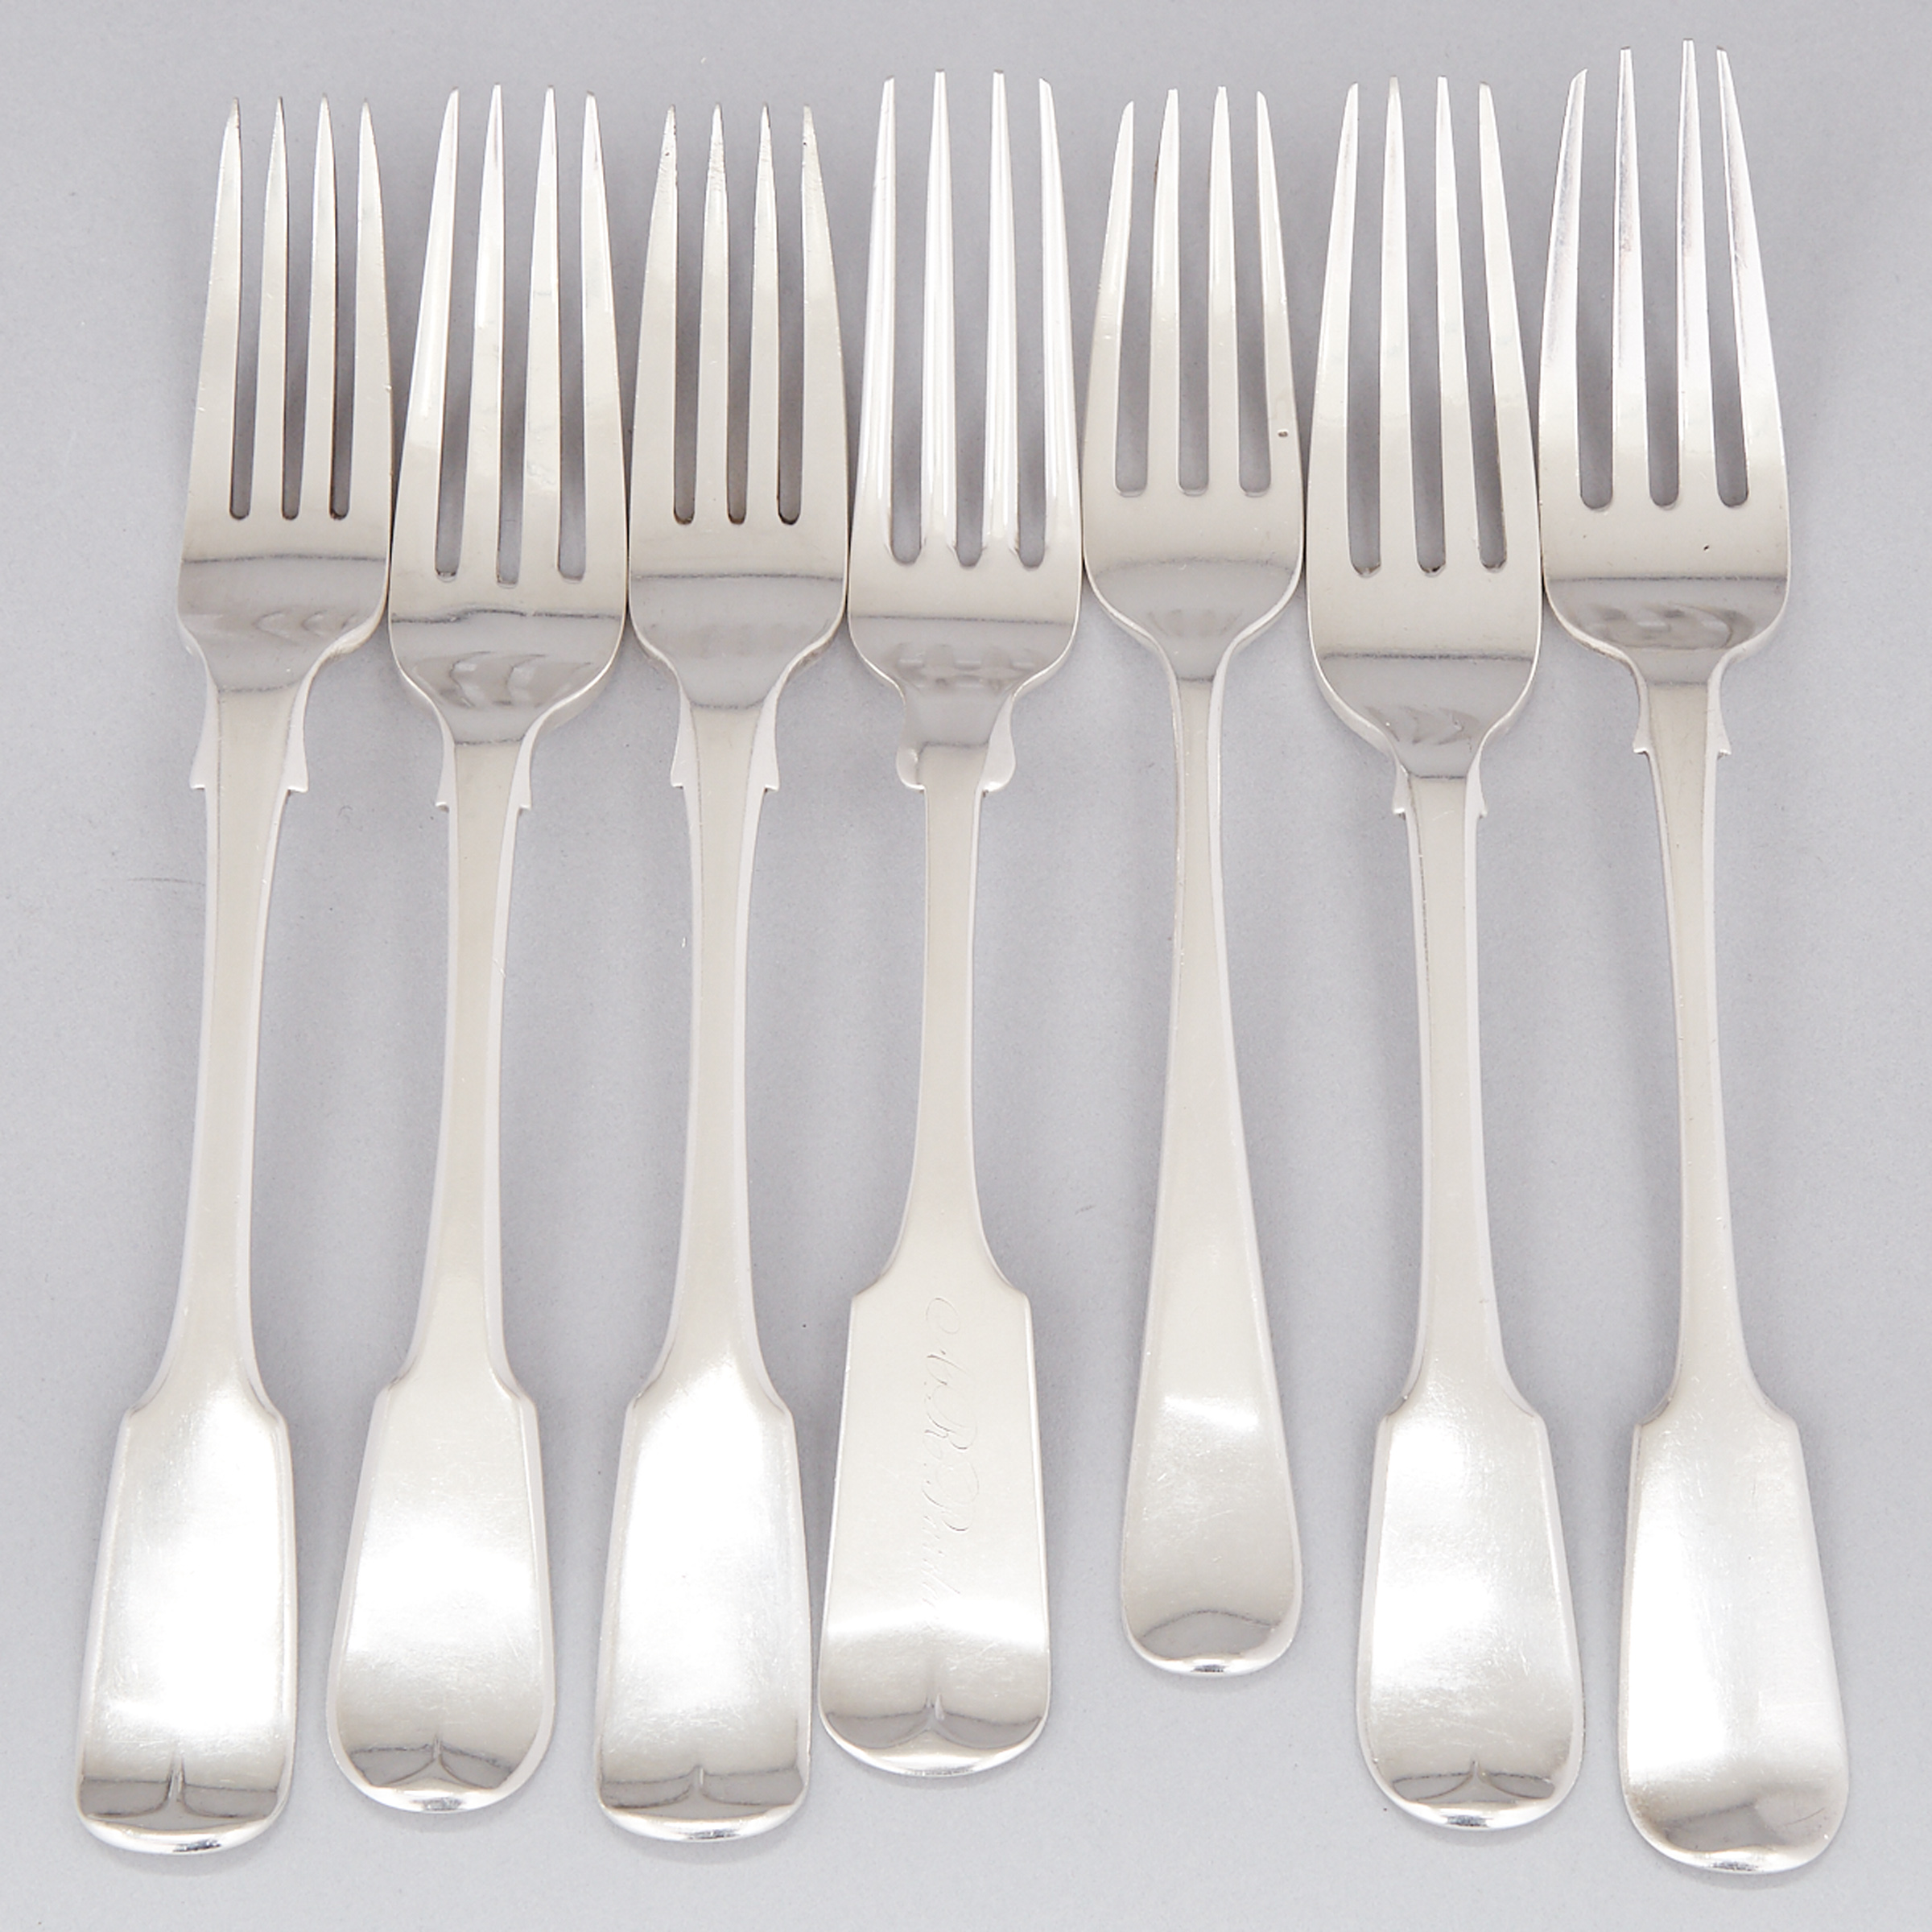 Seven Canadian Silver Fiddle and Old English Pattern Dinner Forks, various makers, 19th century